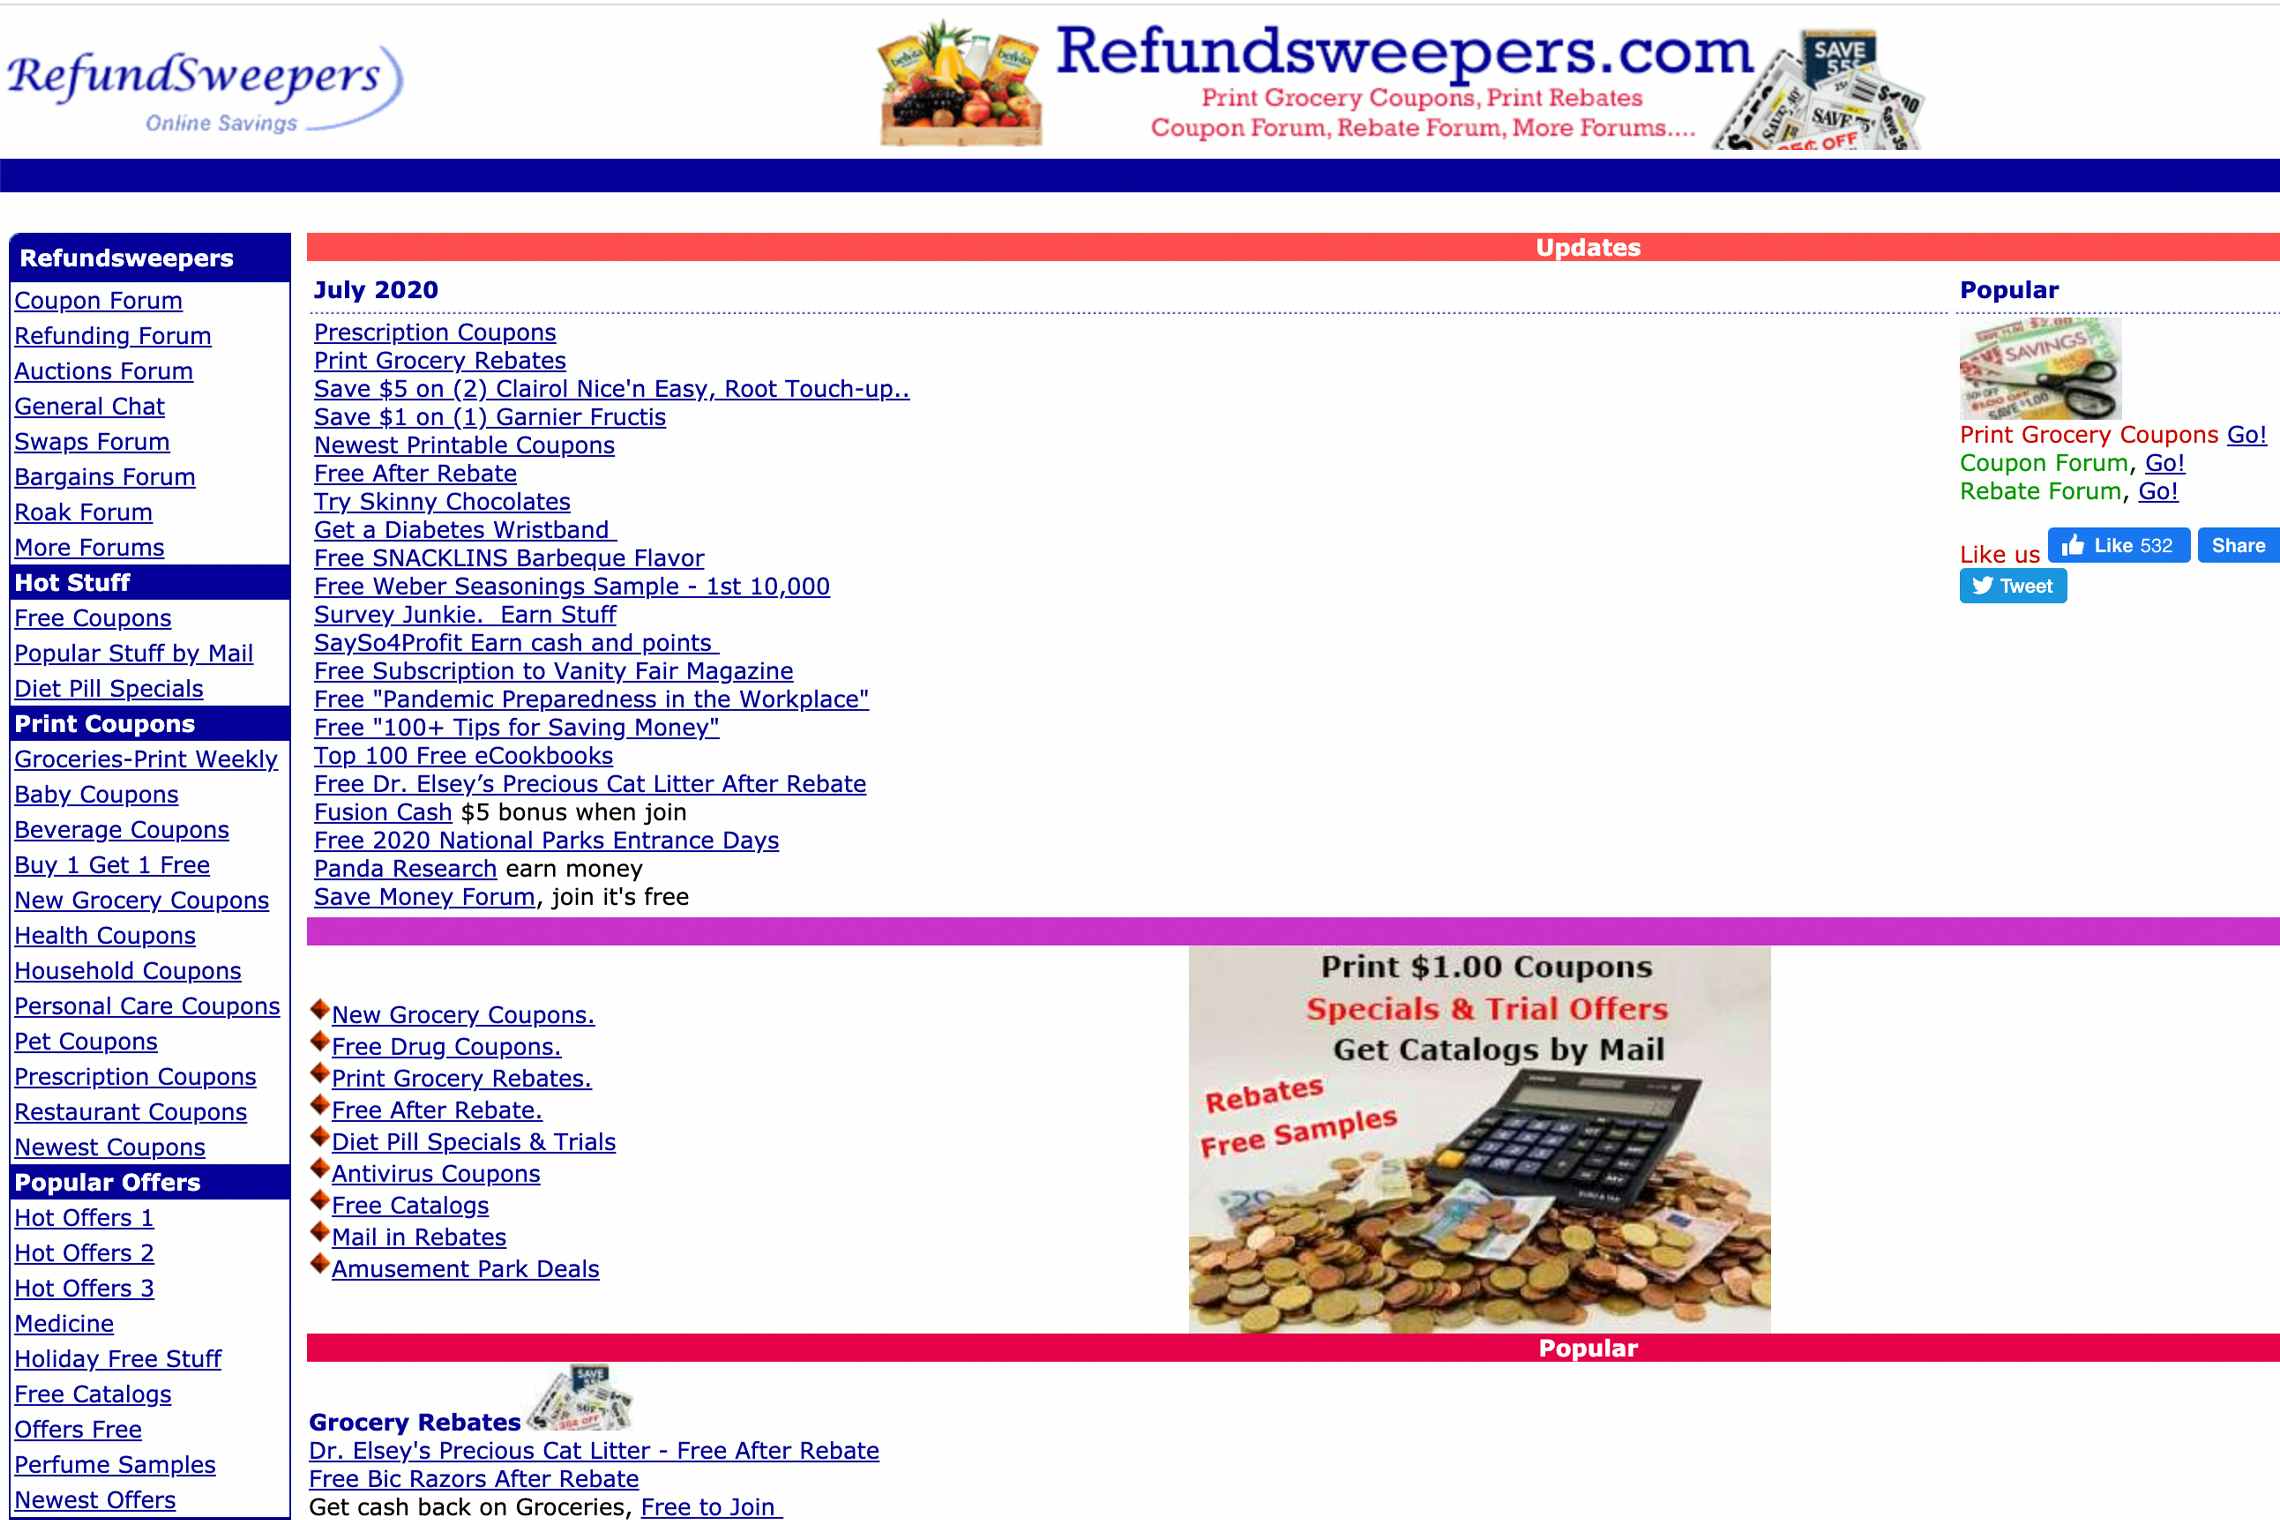 The homepage for Refundsweepers website for trading coupons.